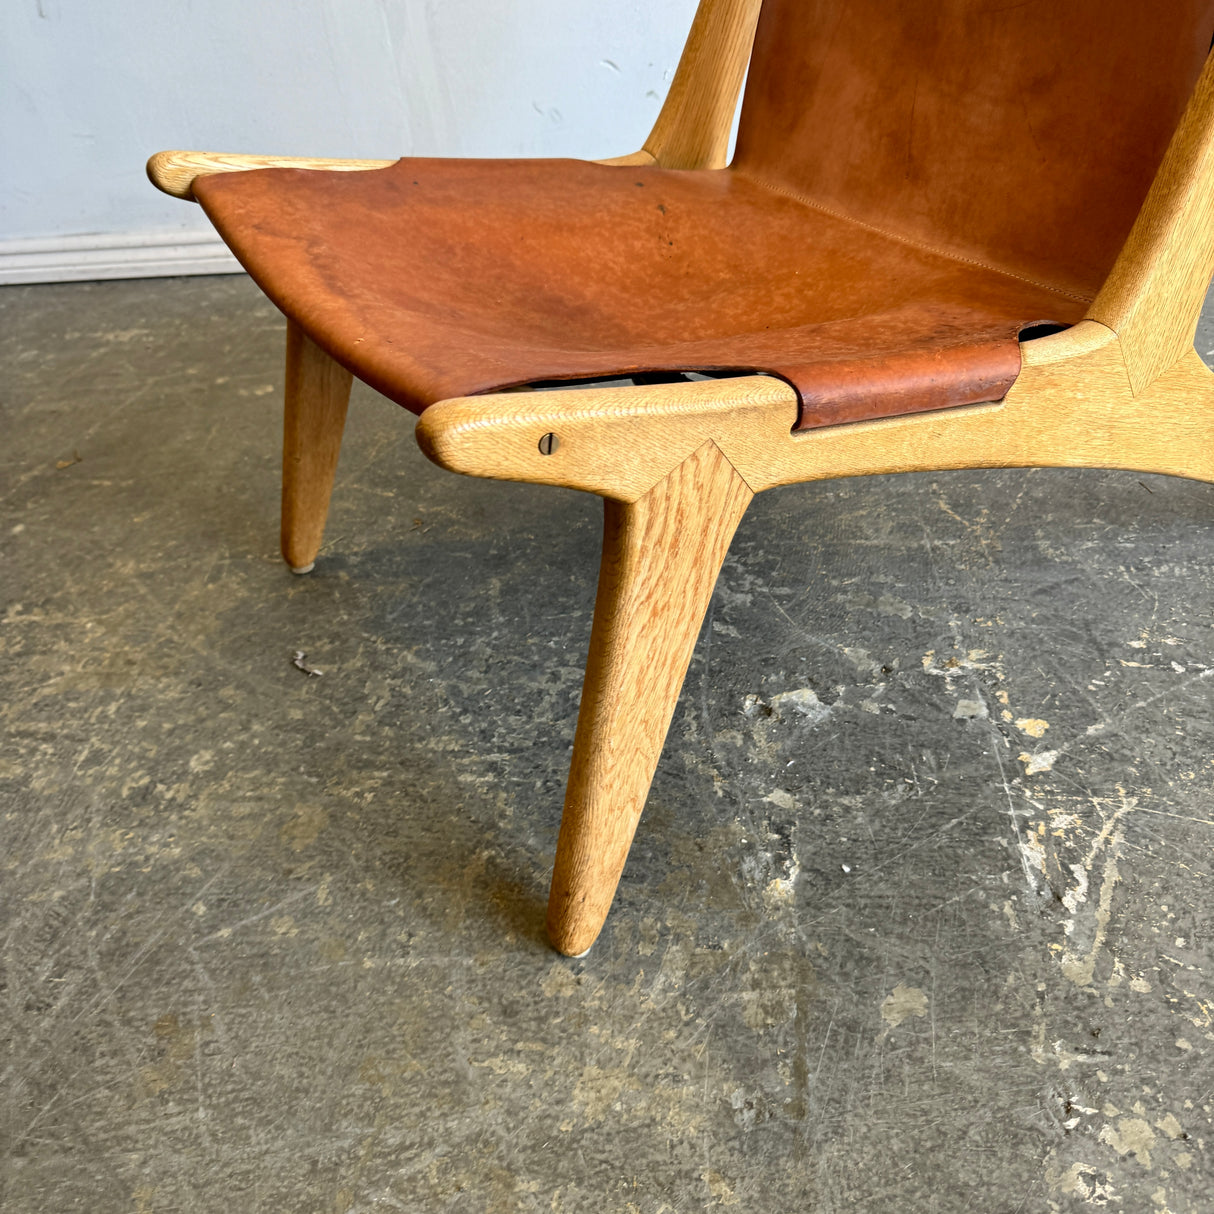 Rare! VIntage Swedish Hunting Chair 204 by Uno & Östen Kristiansson for Luxus